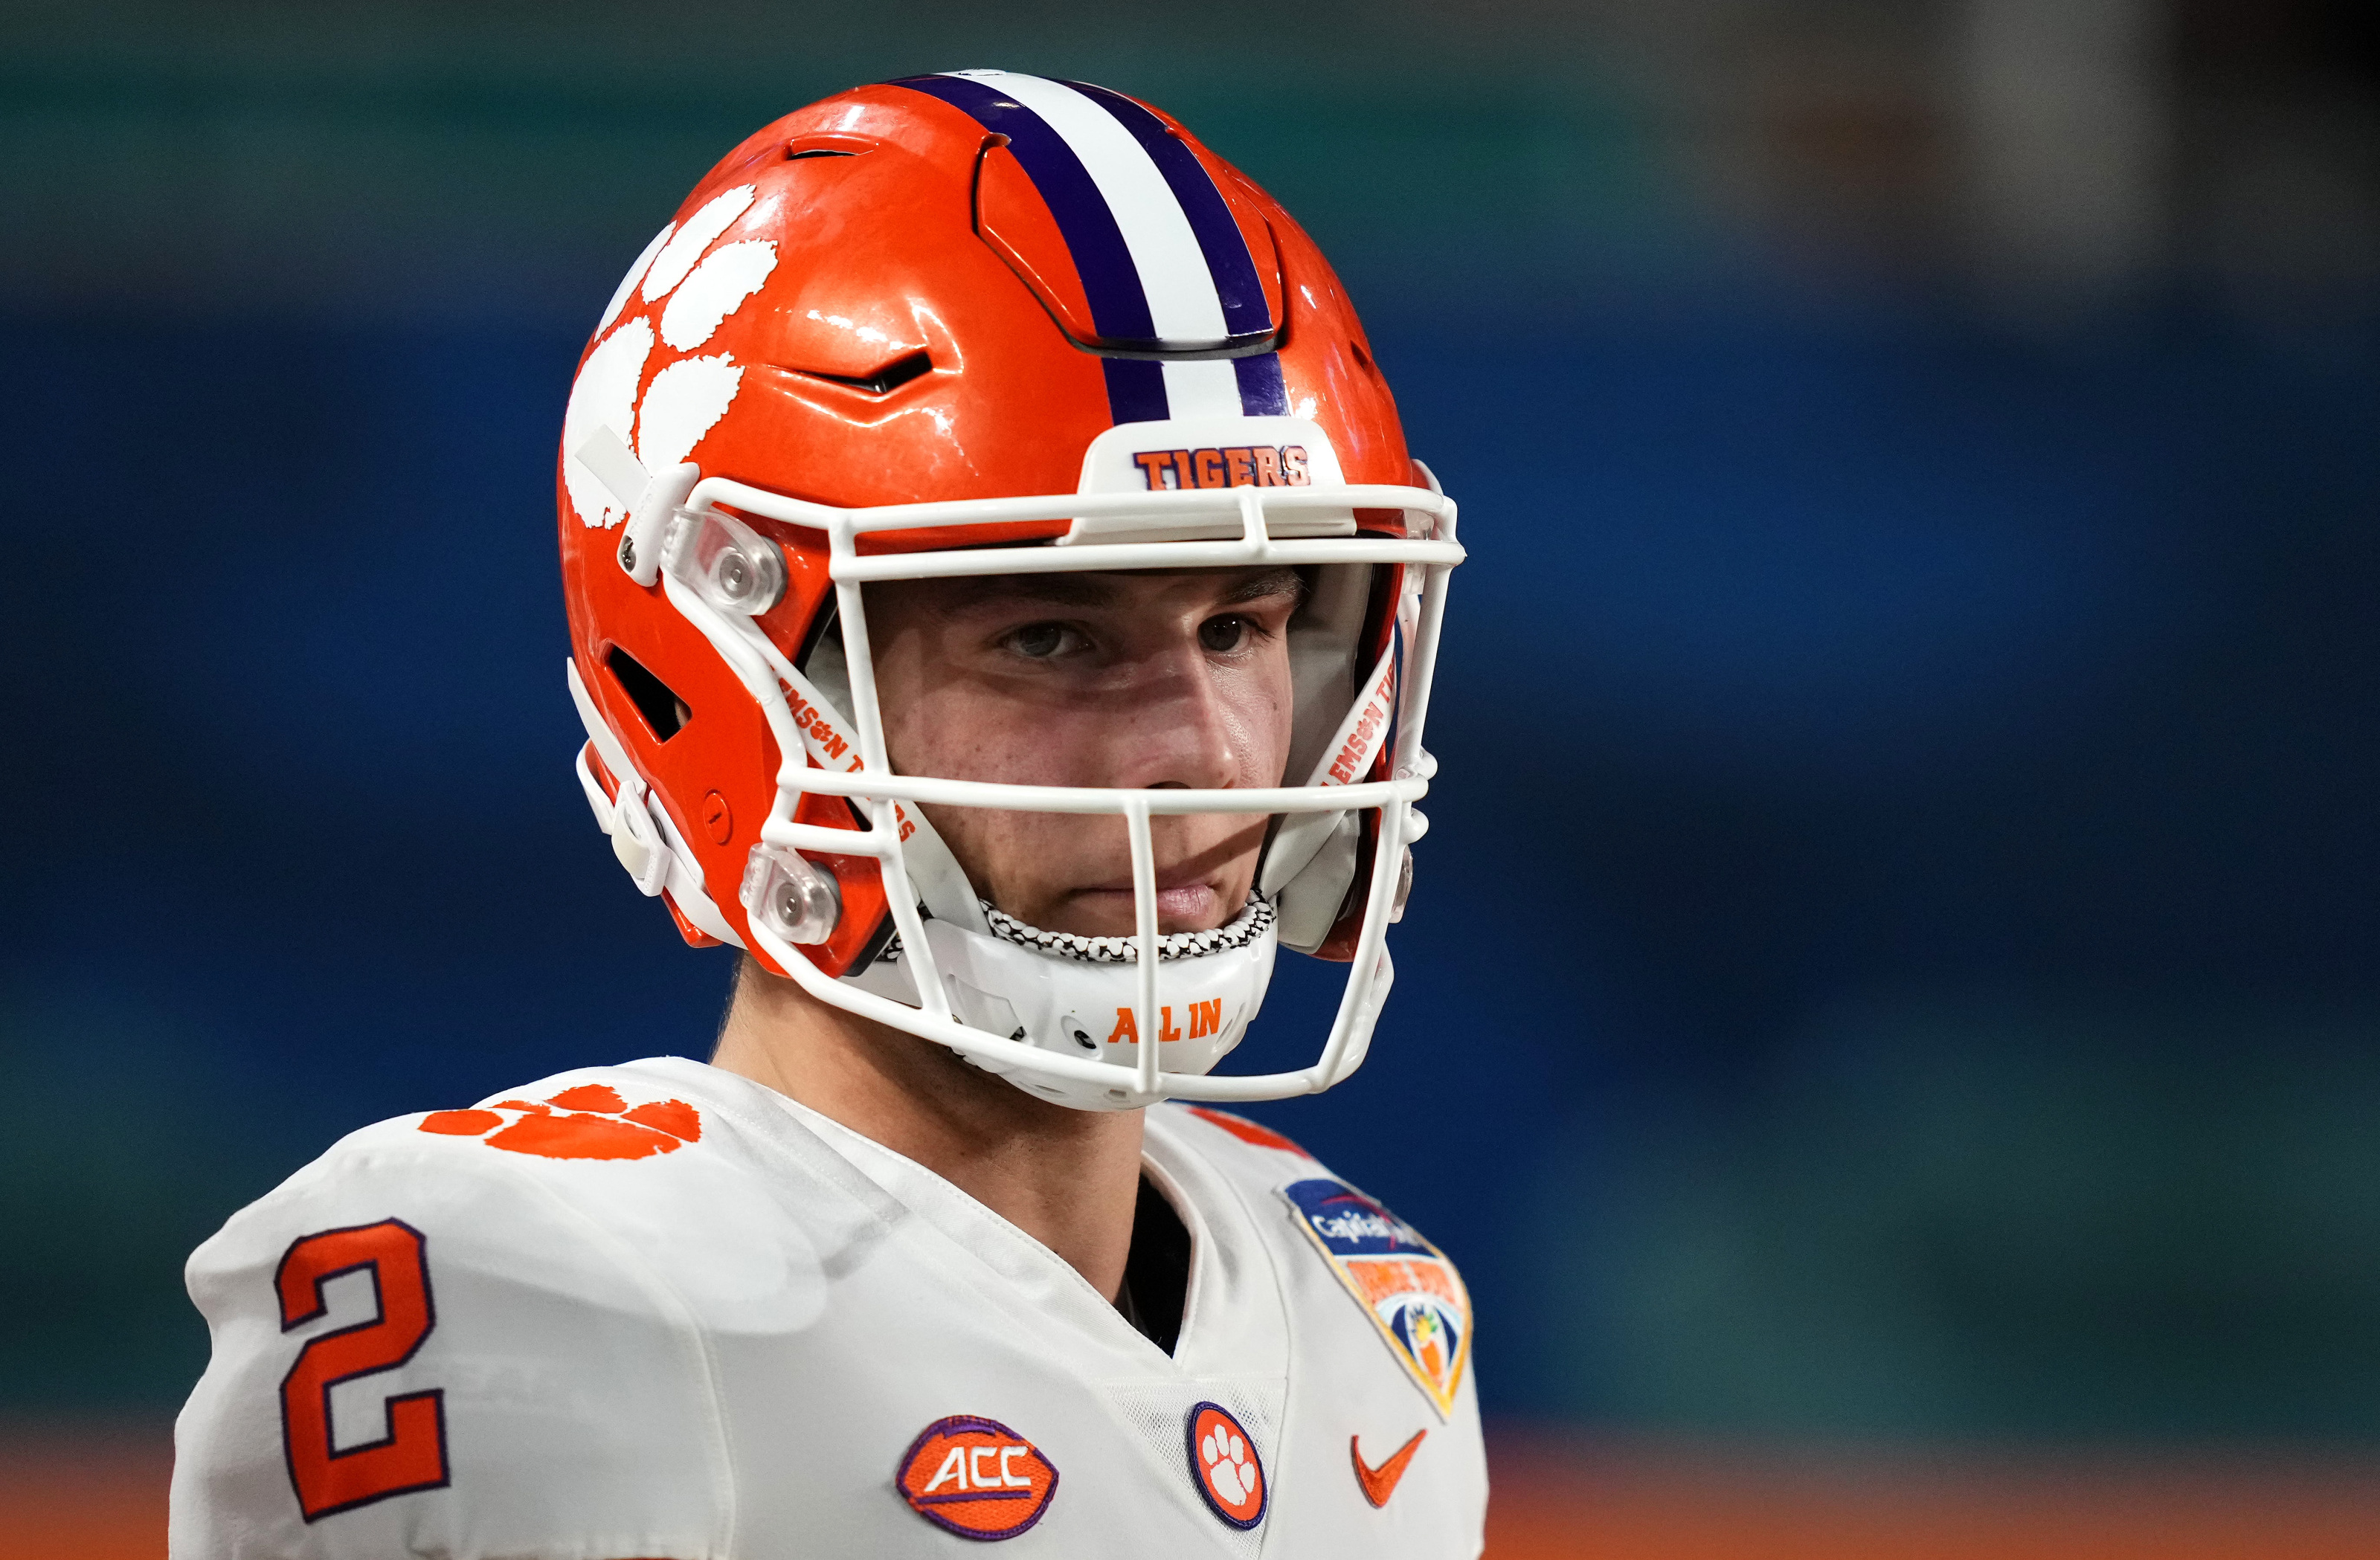 Clemson Tigers: One Quick Thing - If uniforms ain't broke, don't